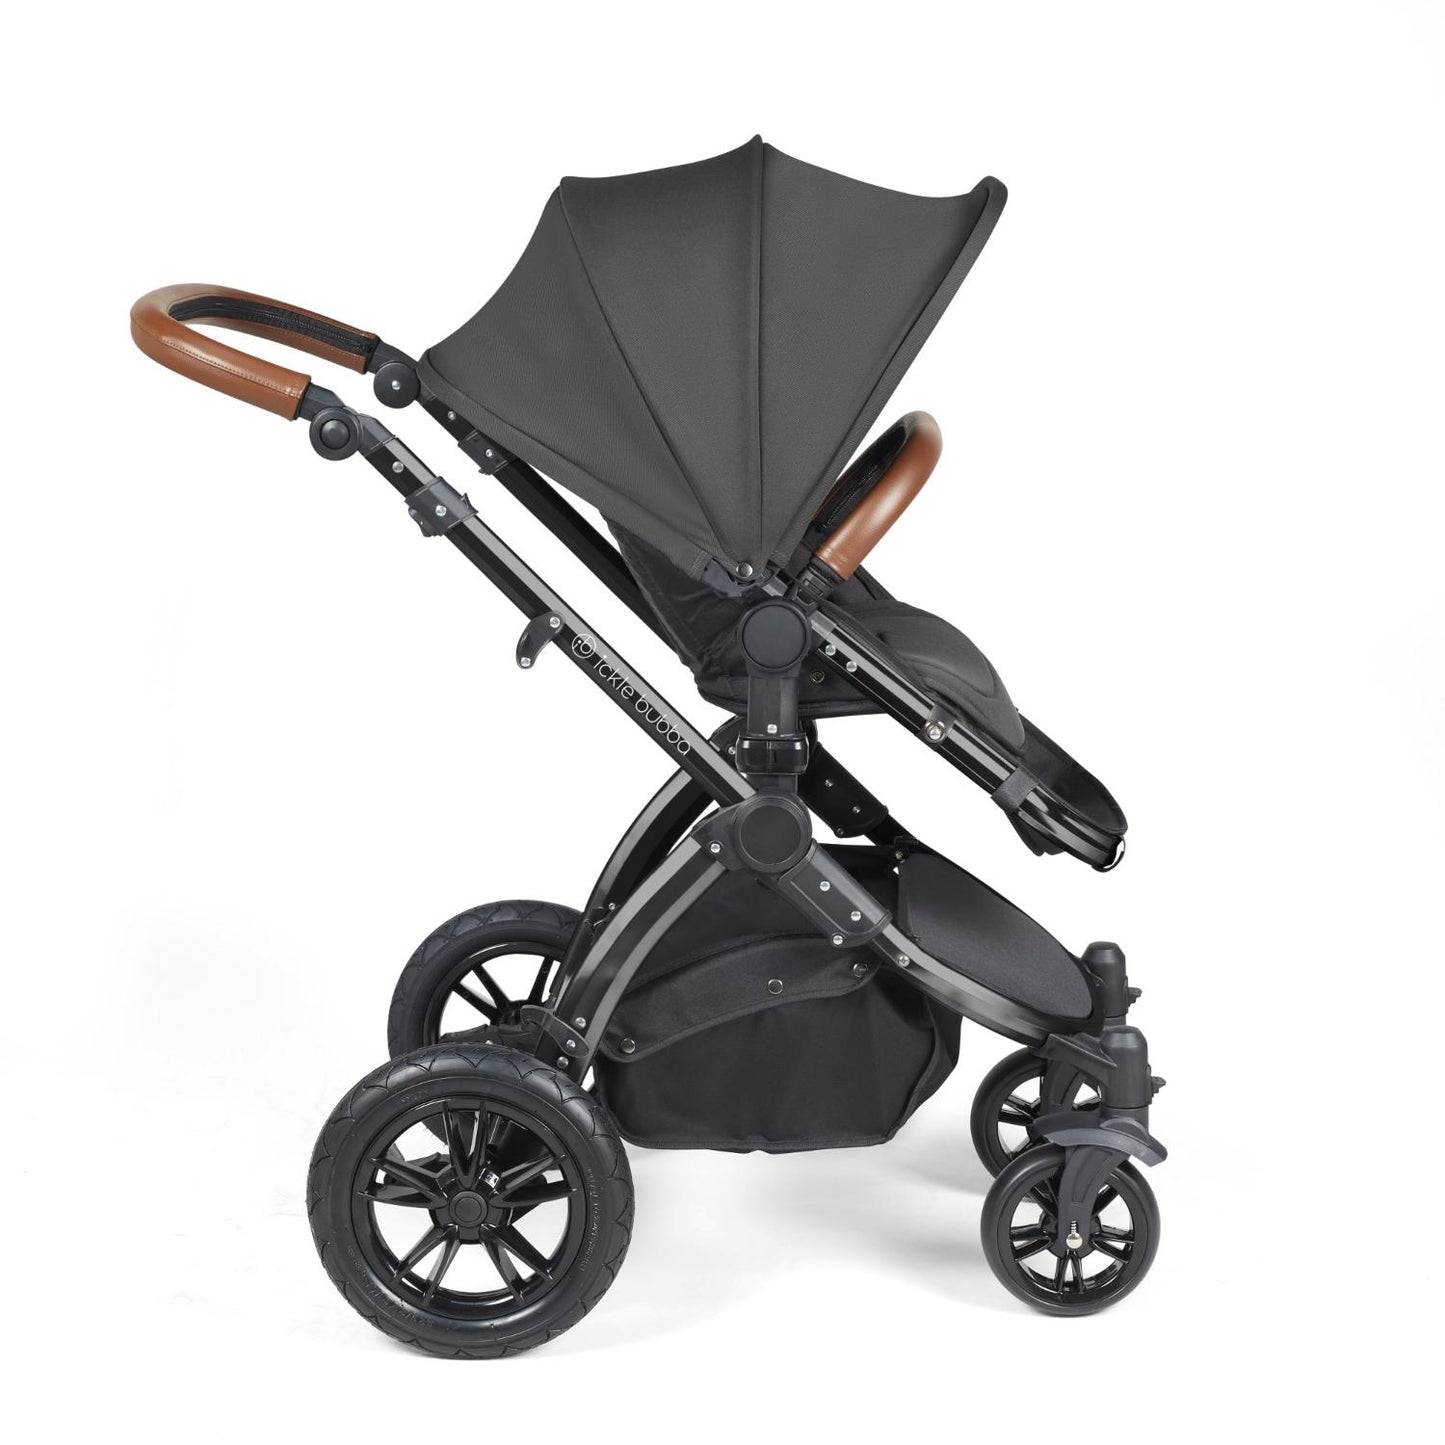 Side view of Ickle Bubba Stomp Luxe Pushchair with seat unit attached in Charcoal Grey colour with tan handle